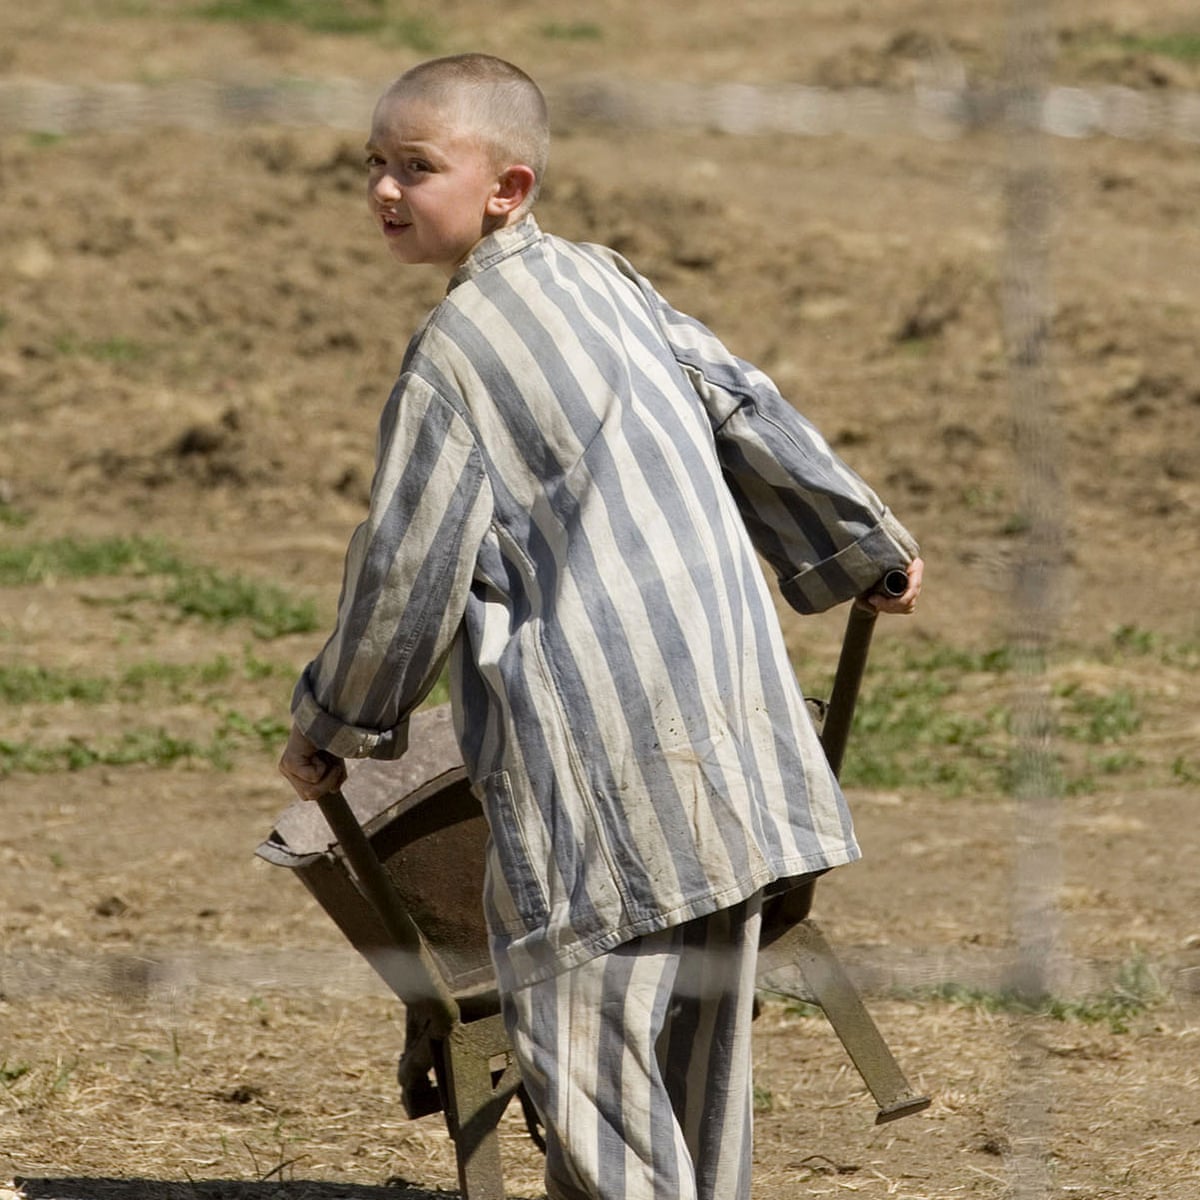 The most poignant quotes from The Boy in the Striped Pyjamas. Children's books